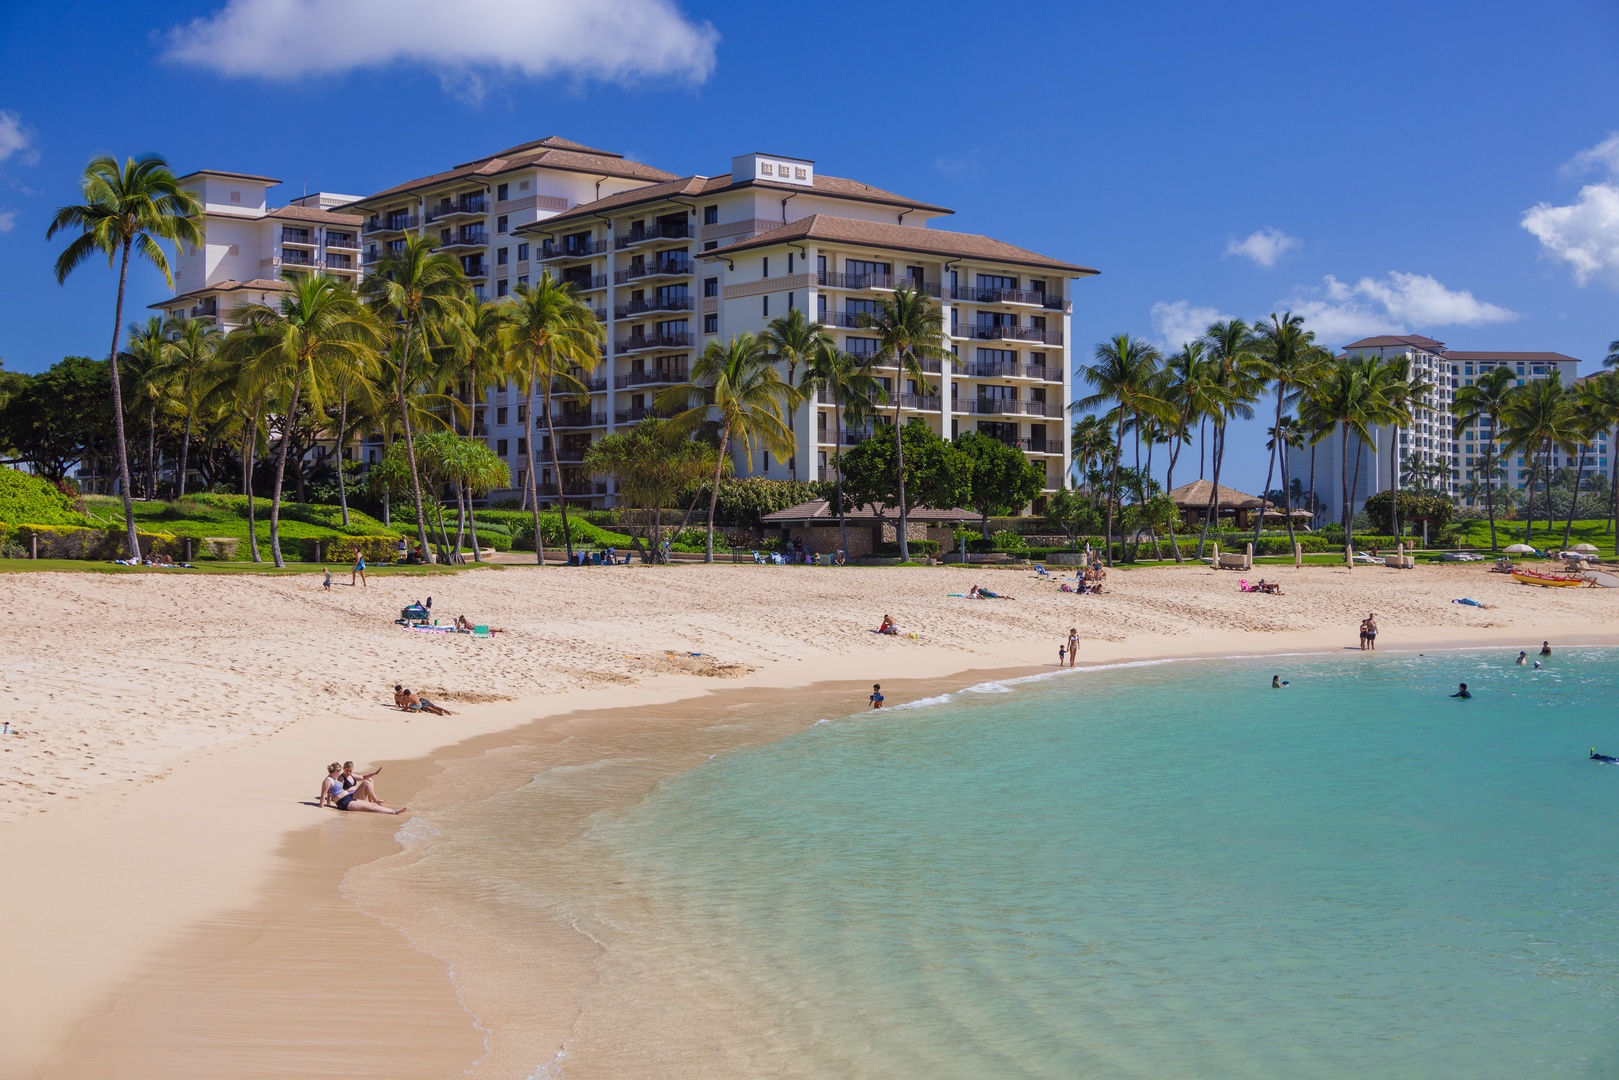 Kapolei Vacation Rentals, Ko Olina Kai 1047B - The private lagoon at Ko Olina is the perfect place for a relaxing afternoon in the sun.